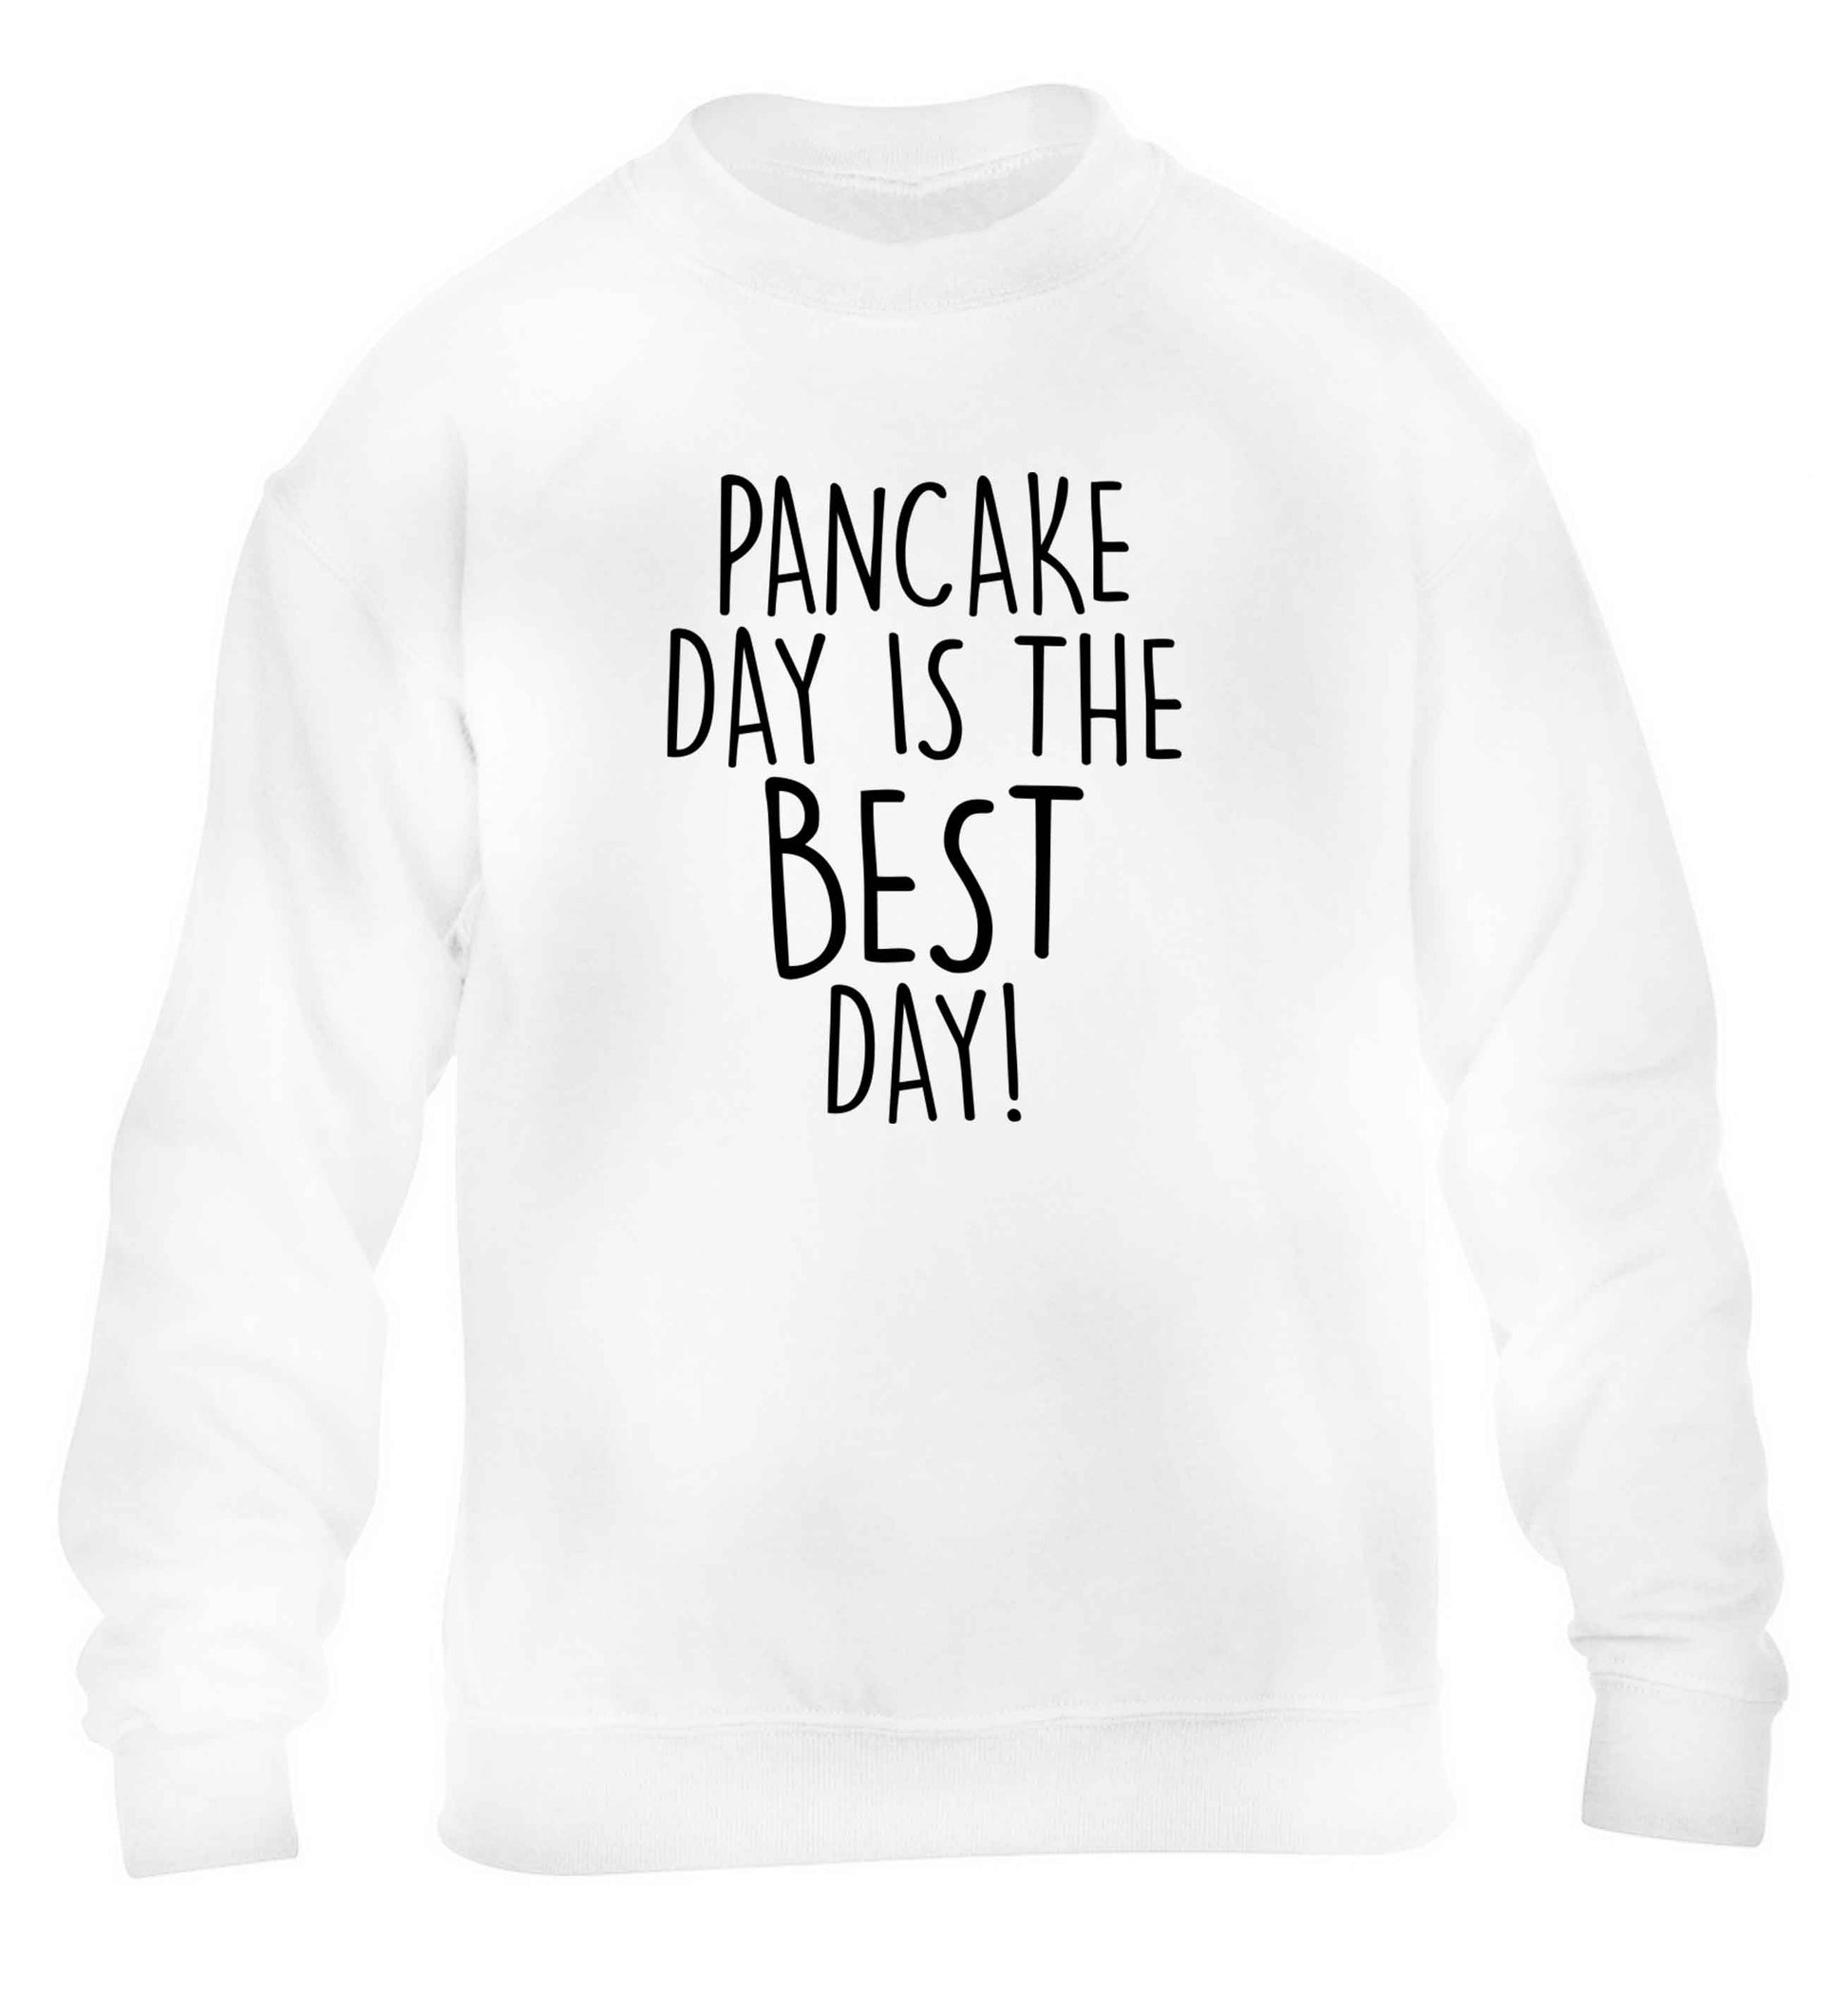 Pancake day is the best day children's white sweater 12-13 Years